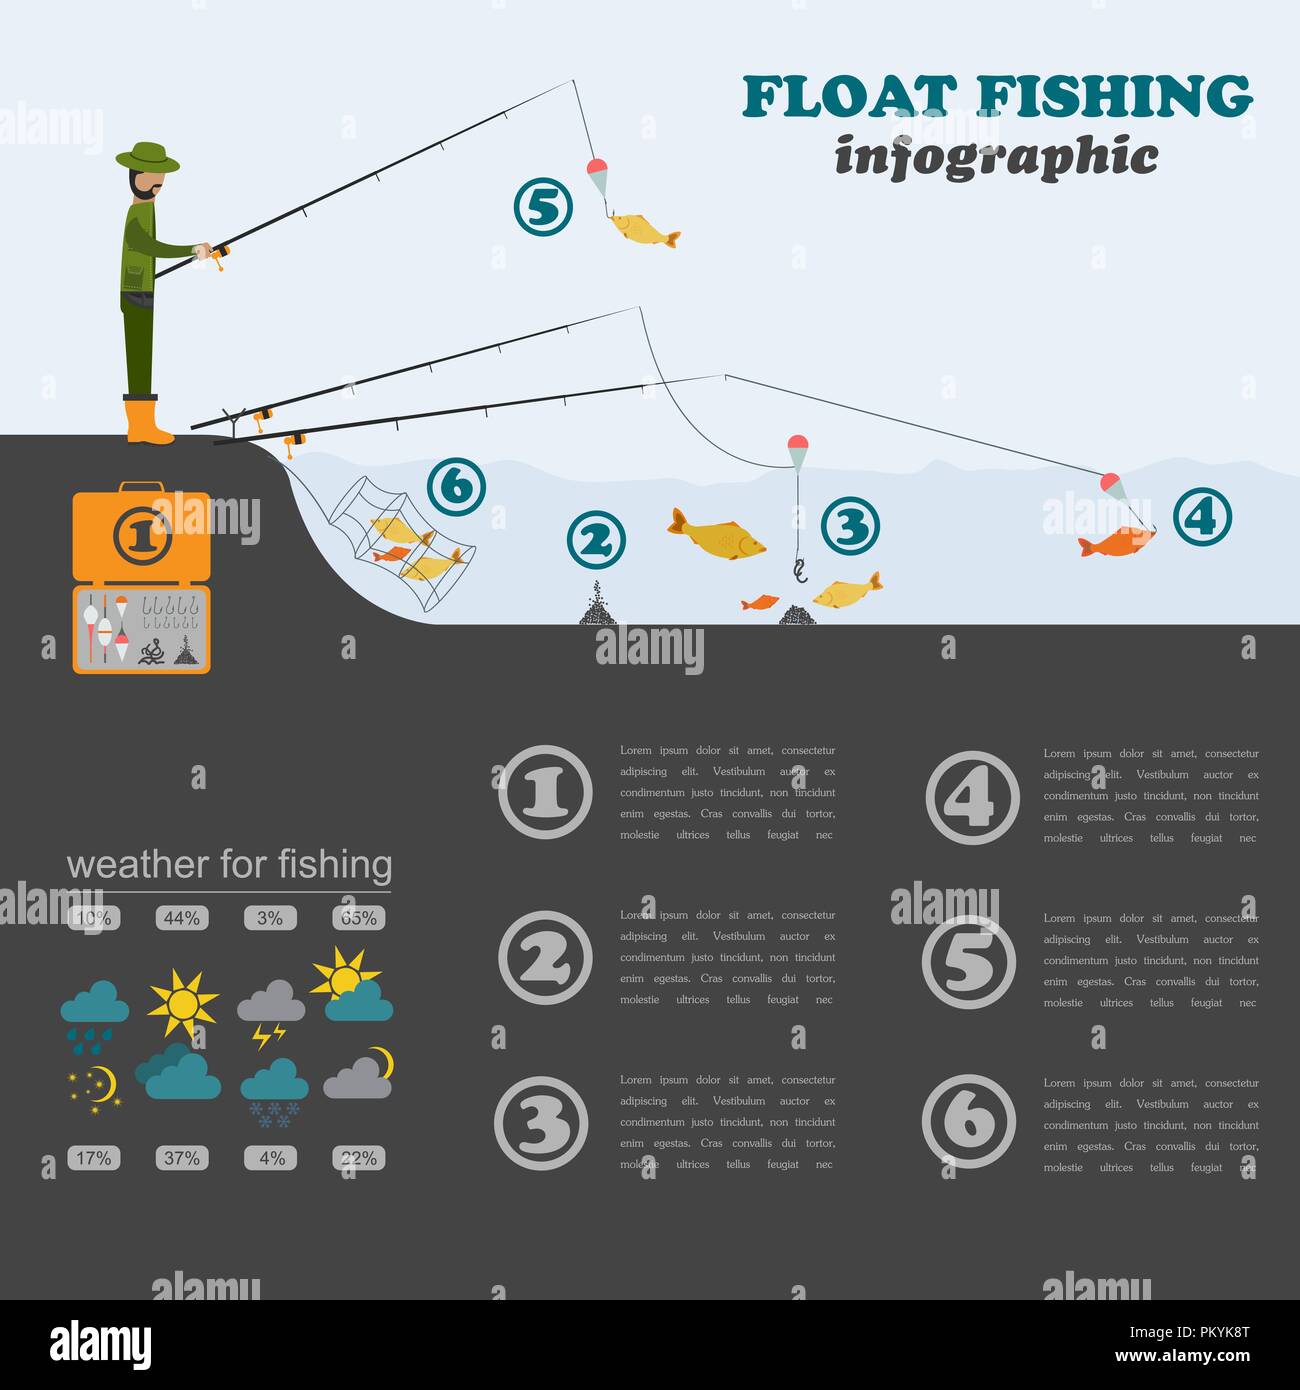 Fishing infographic. Float fishing. Set elements for creating your own infographic design. Vector illustration Stock Vector